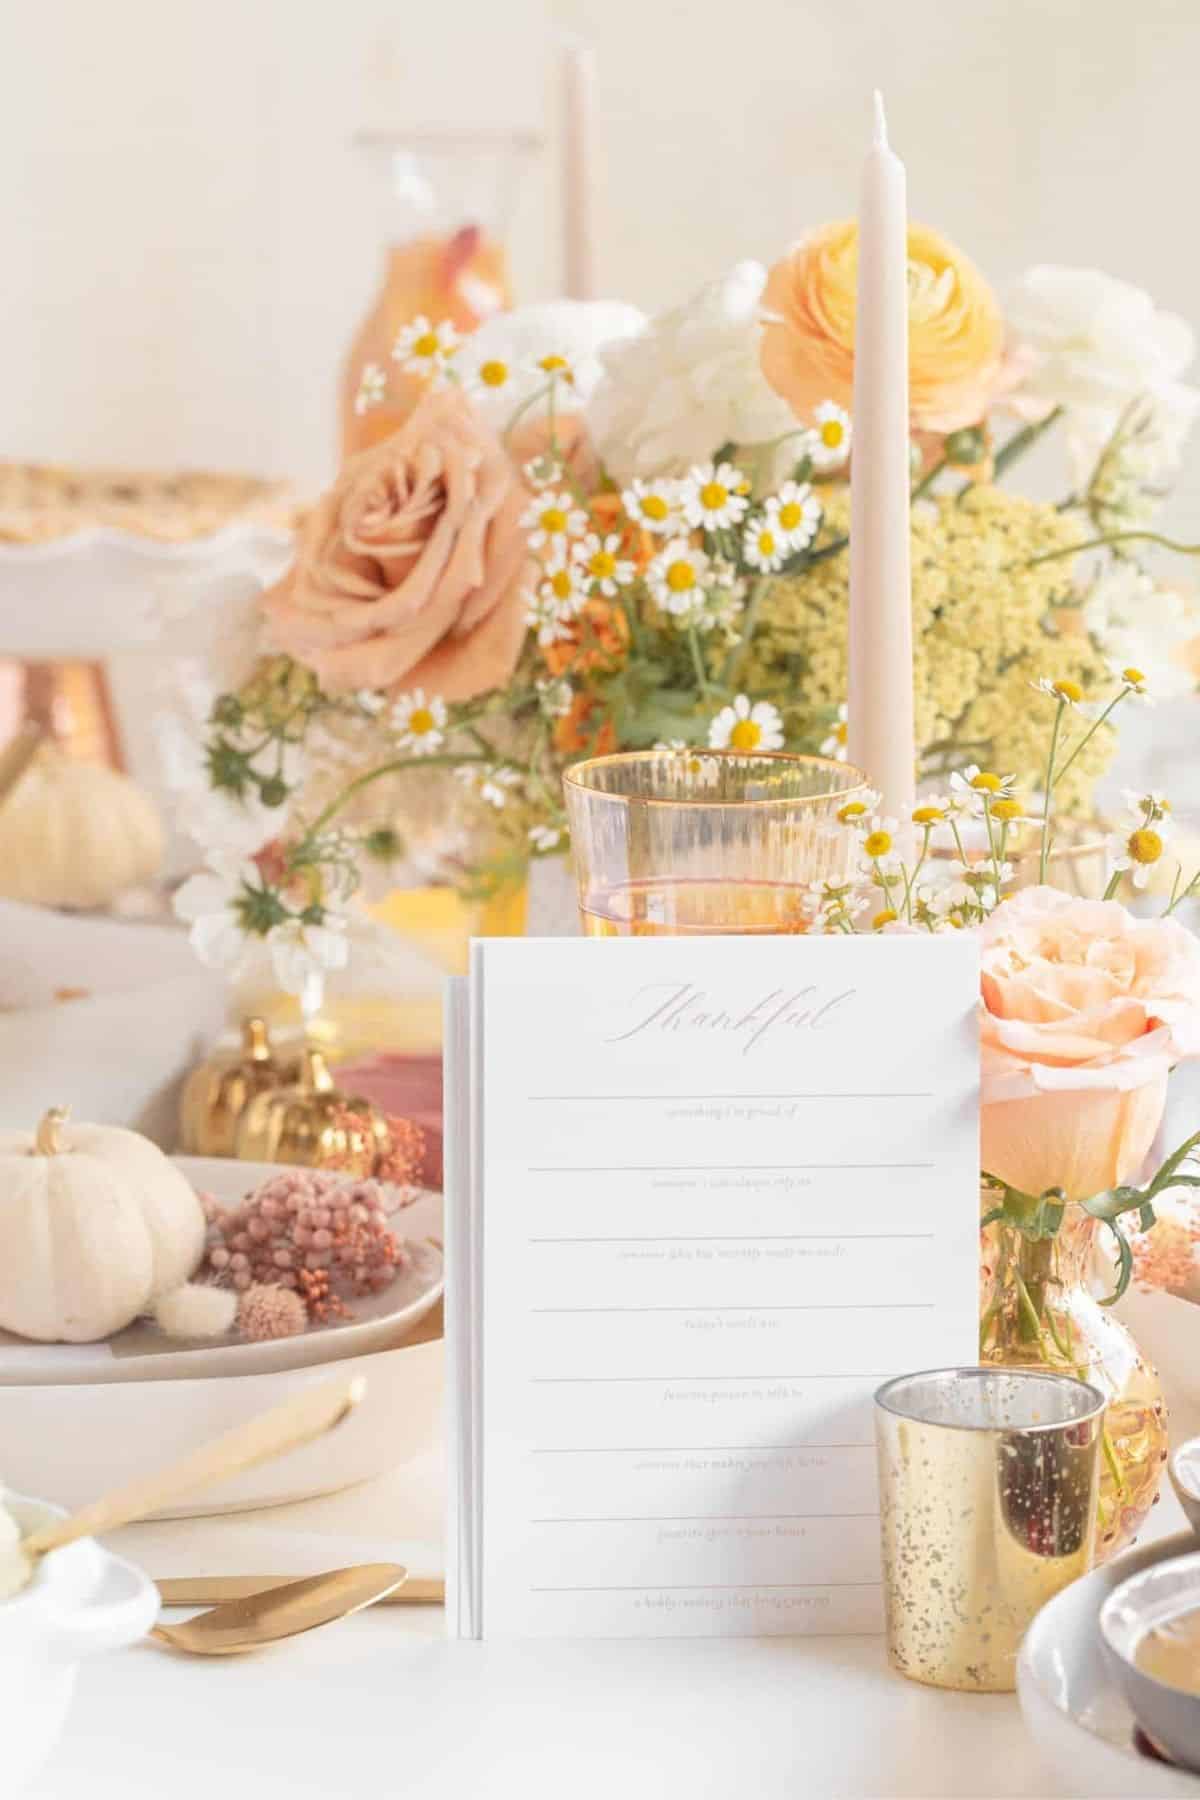 Mini Thanksgiving table setting and thankful card